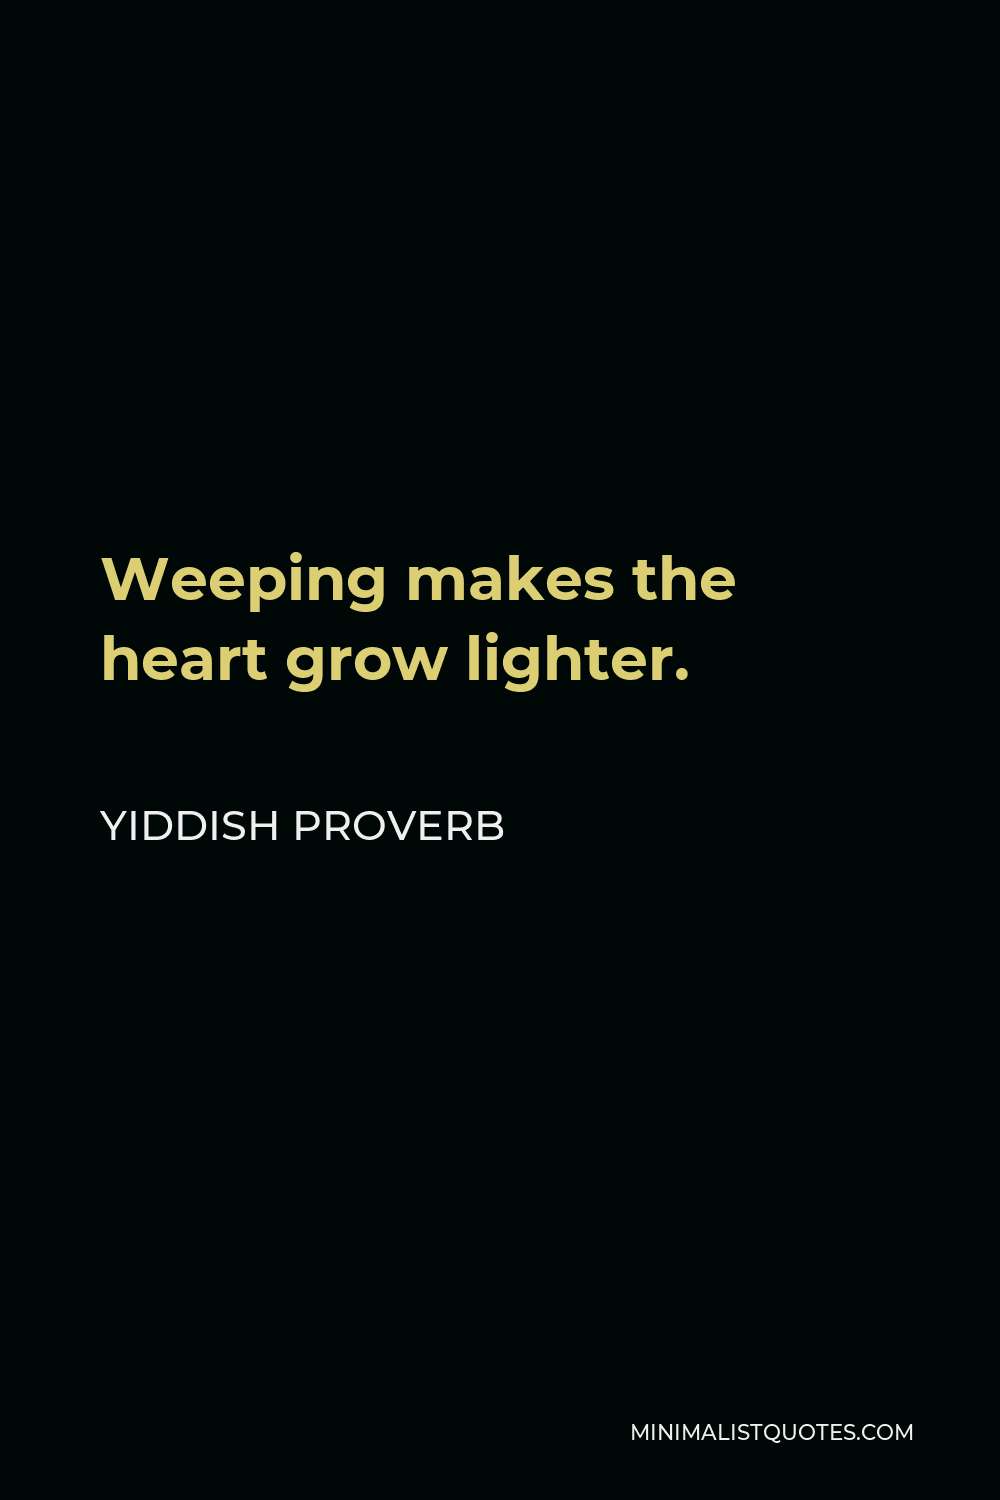 Yiddish Proverb Quote - Weeping makes the heart grow lighter.